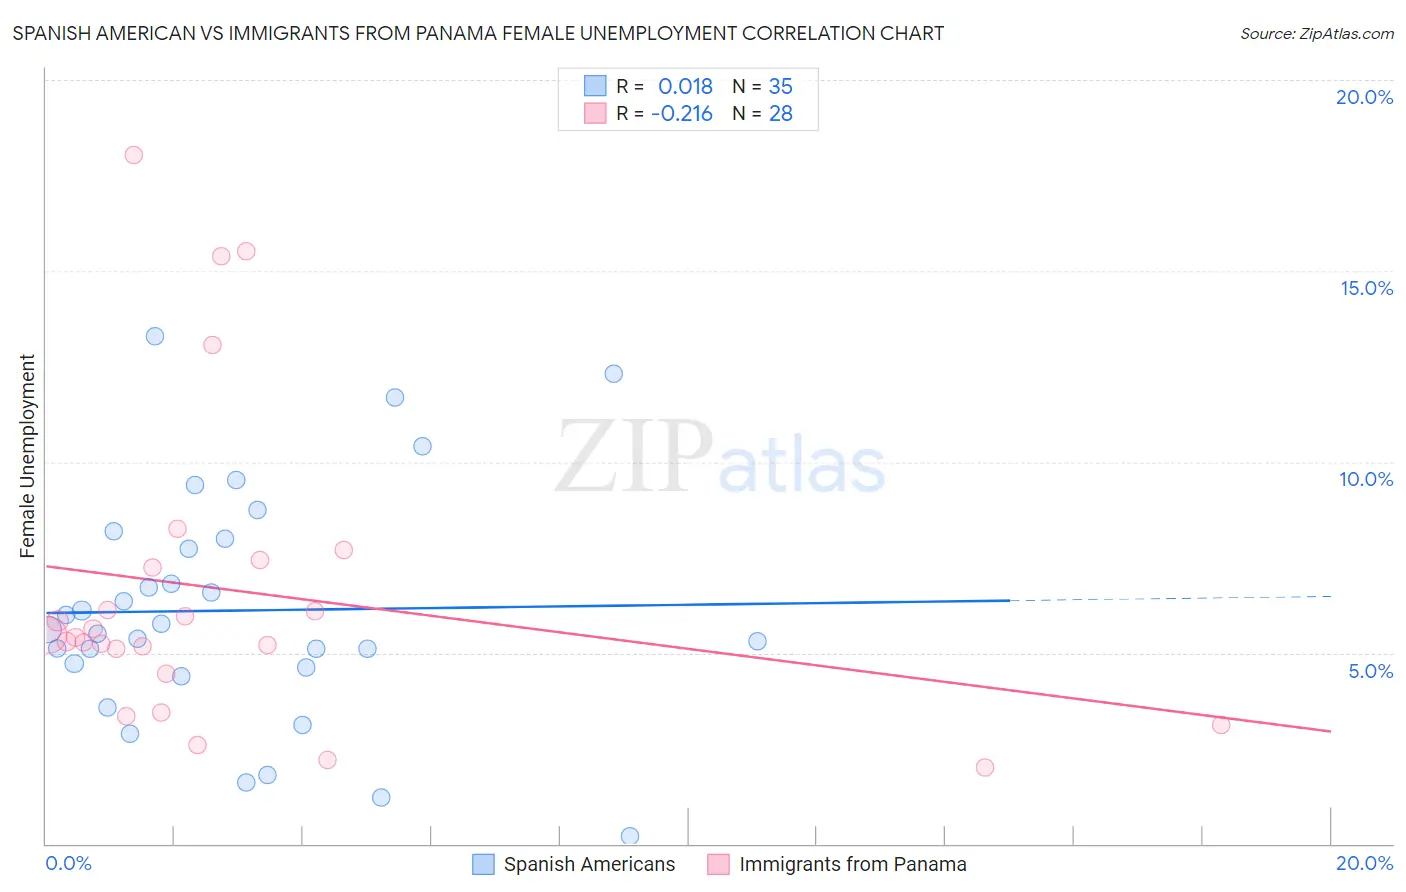 Spanish American vs Immigrants from Panama Female Unemployment